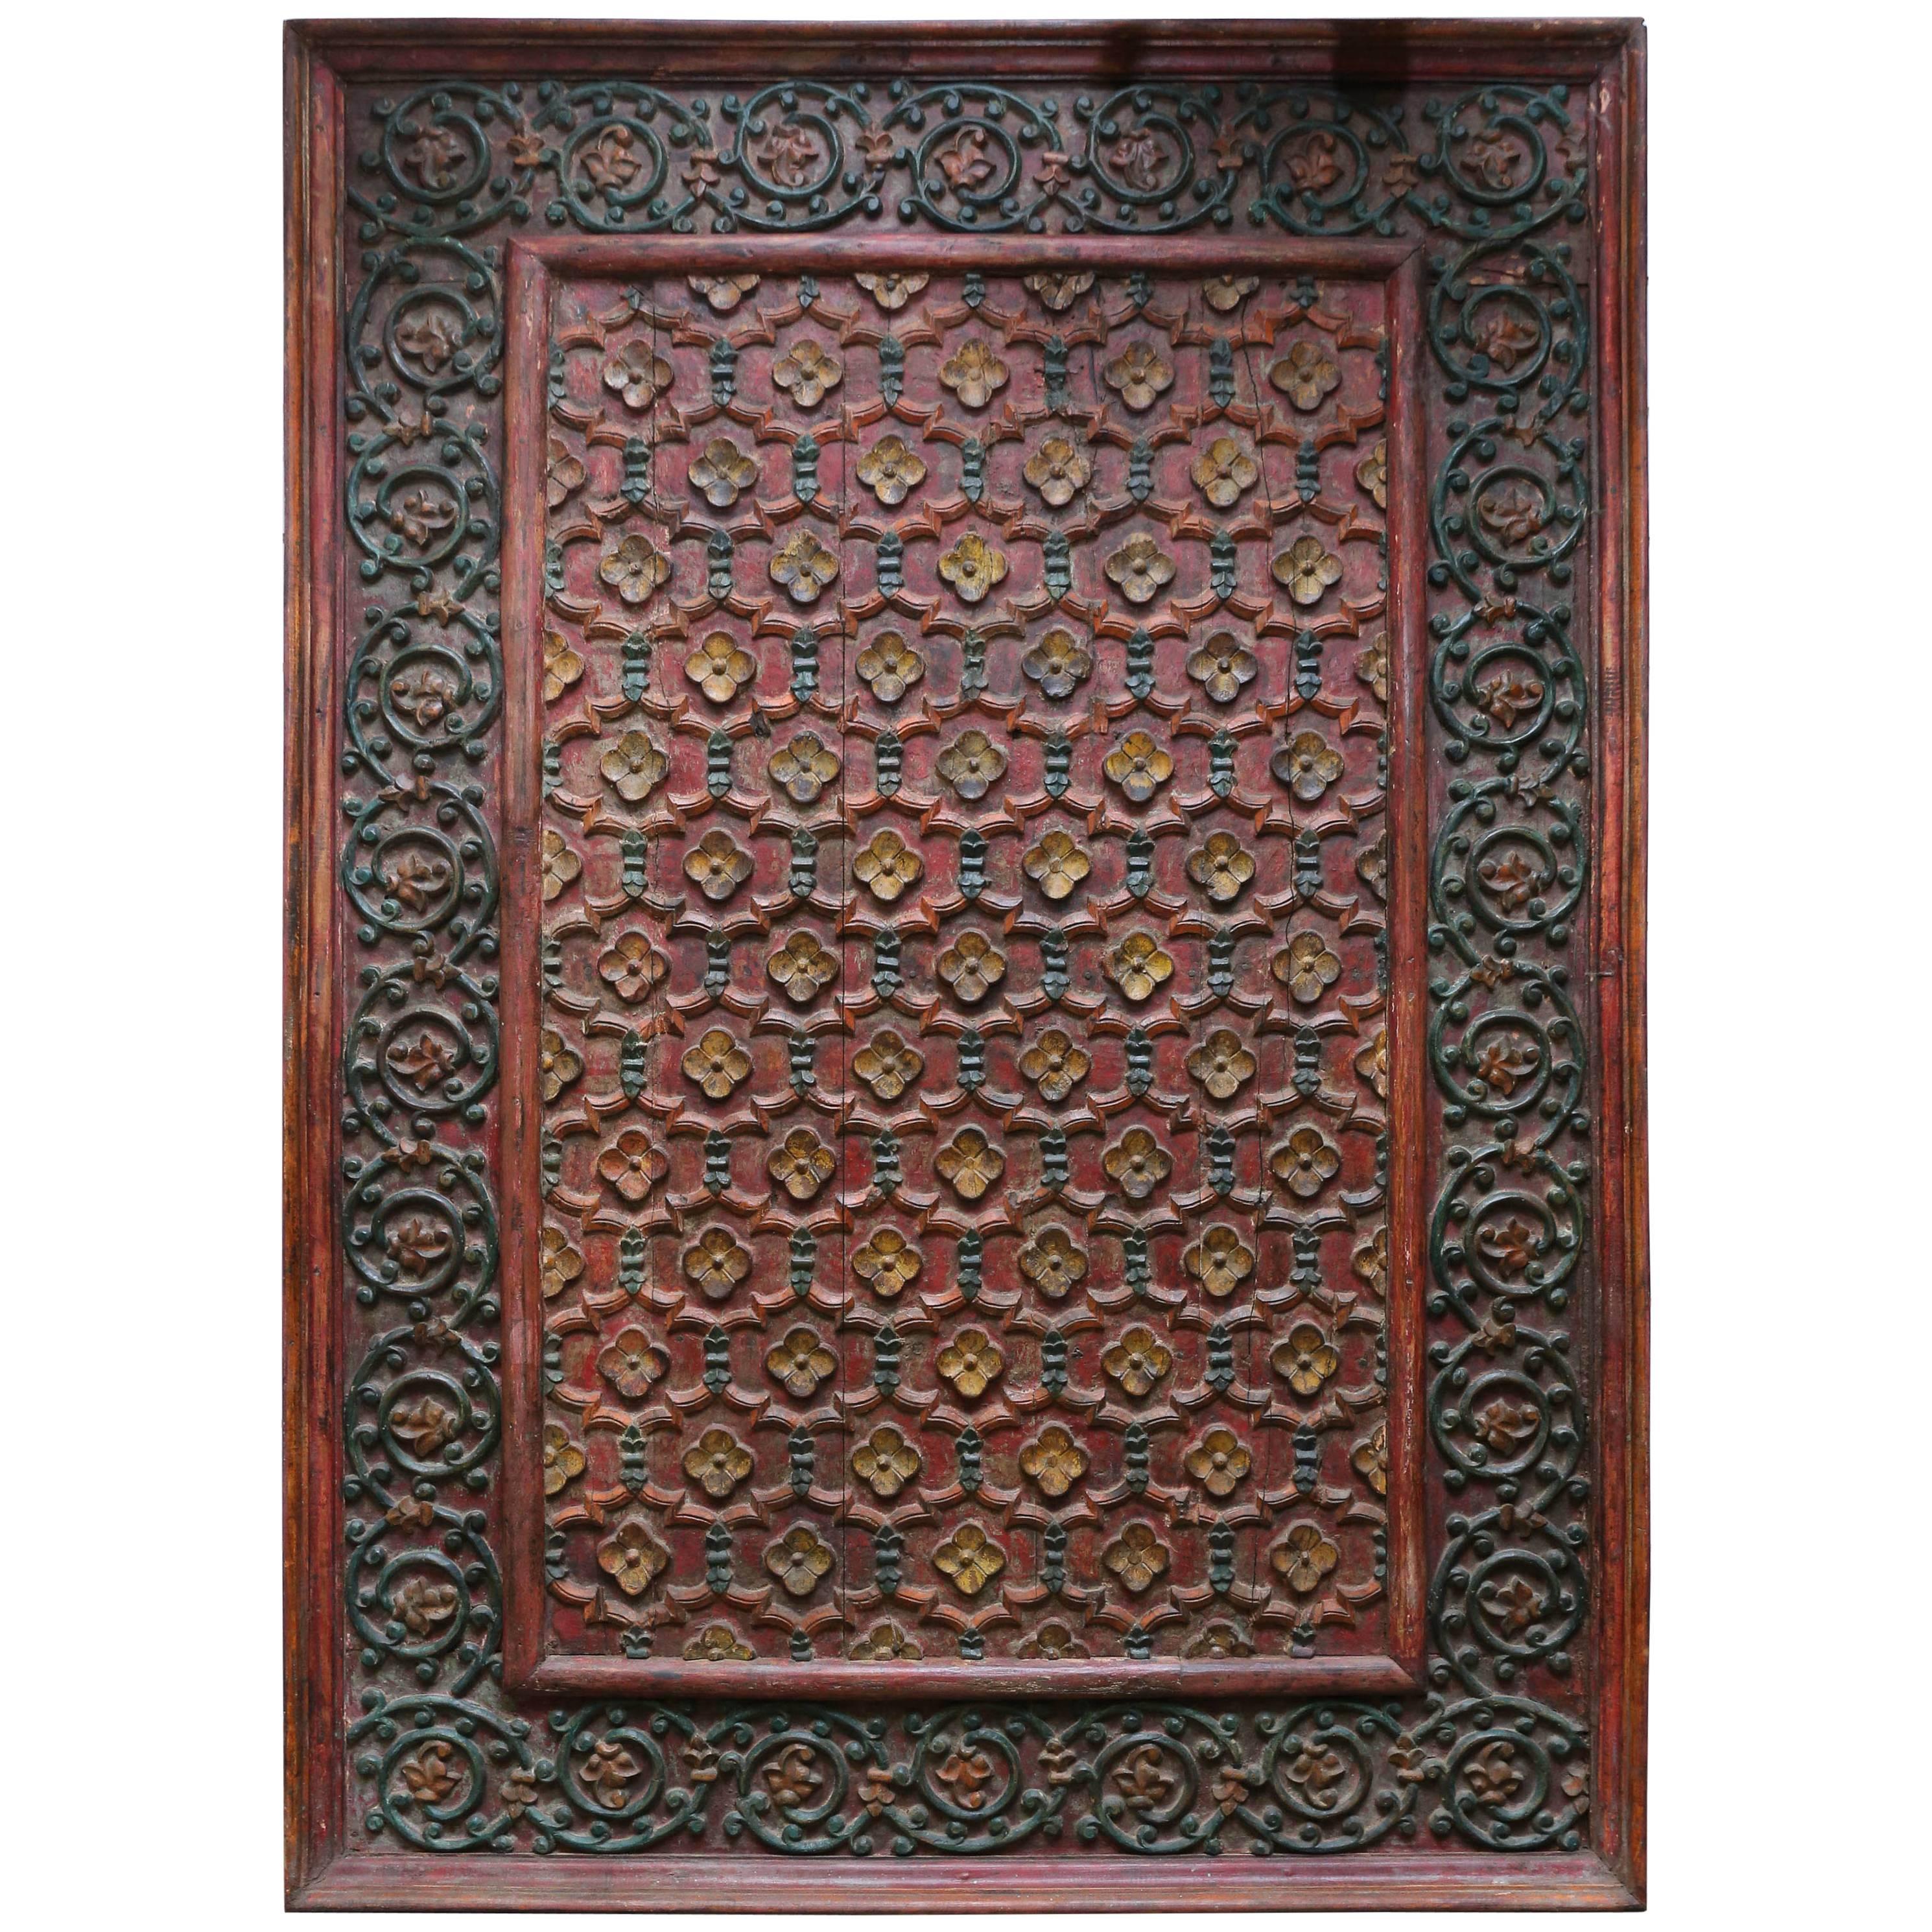 Early 19th Century Highly Carved and Painted Solid Teak Wood Ceiling from a Home